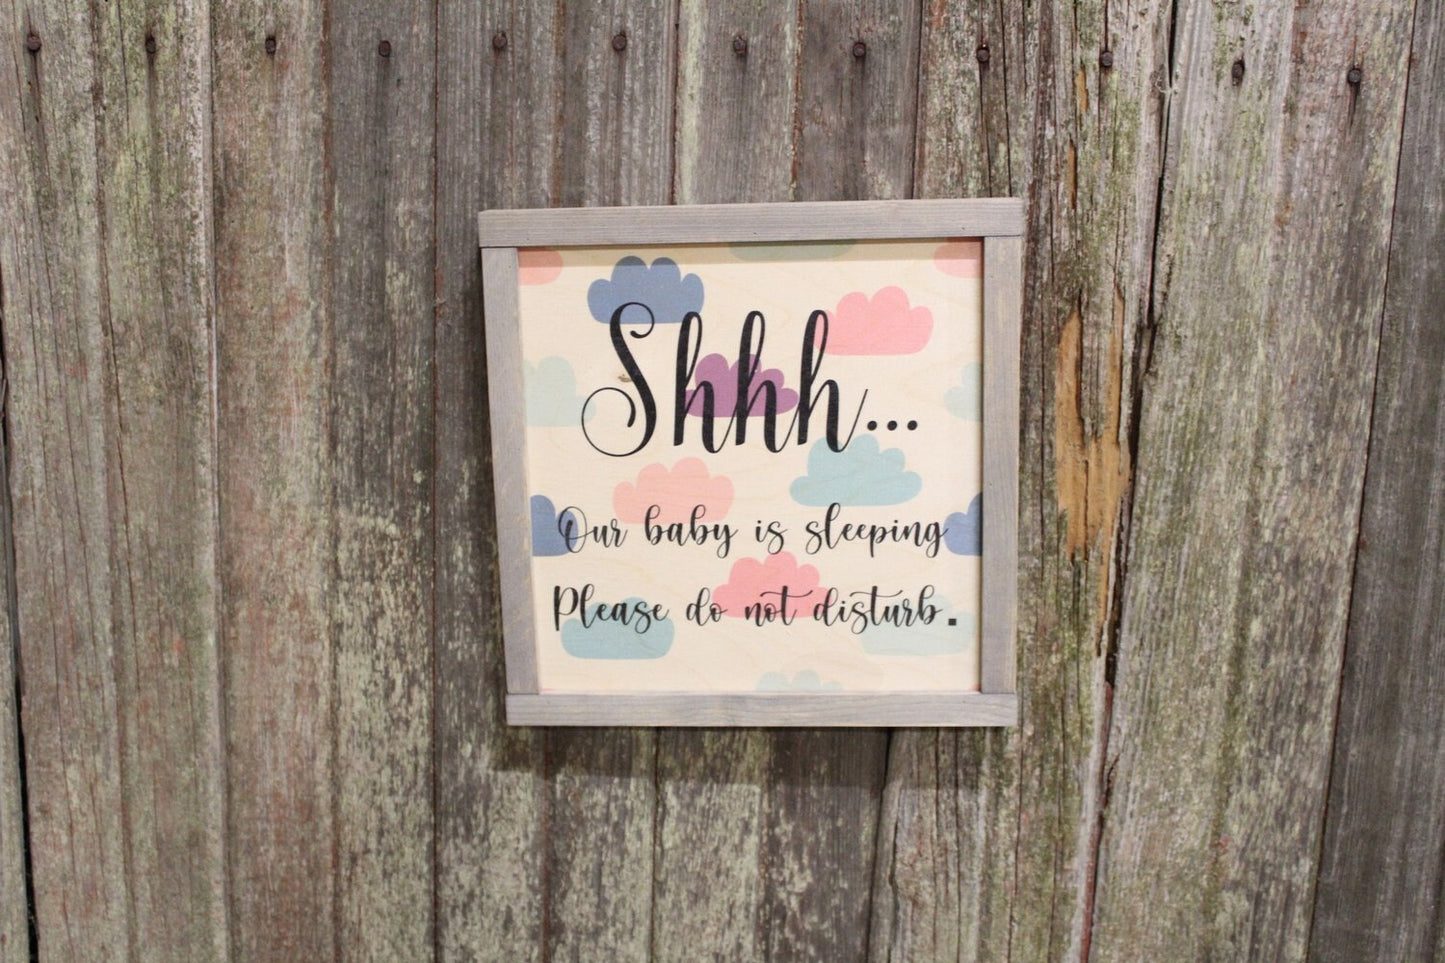 Clouds Nursery Sign Shhh Baby Is Sleeping Framed Wood Pastel Please Do Not Disturb Do Not Knock Ring Bell Wall Art Rustic Decoration Decor